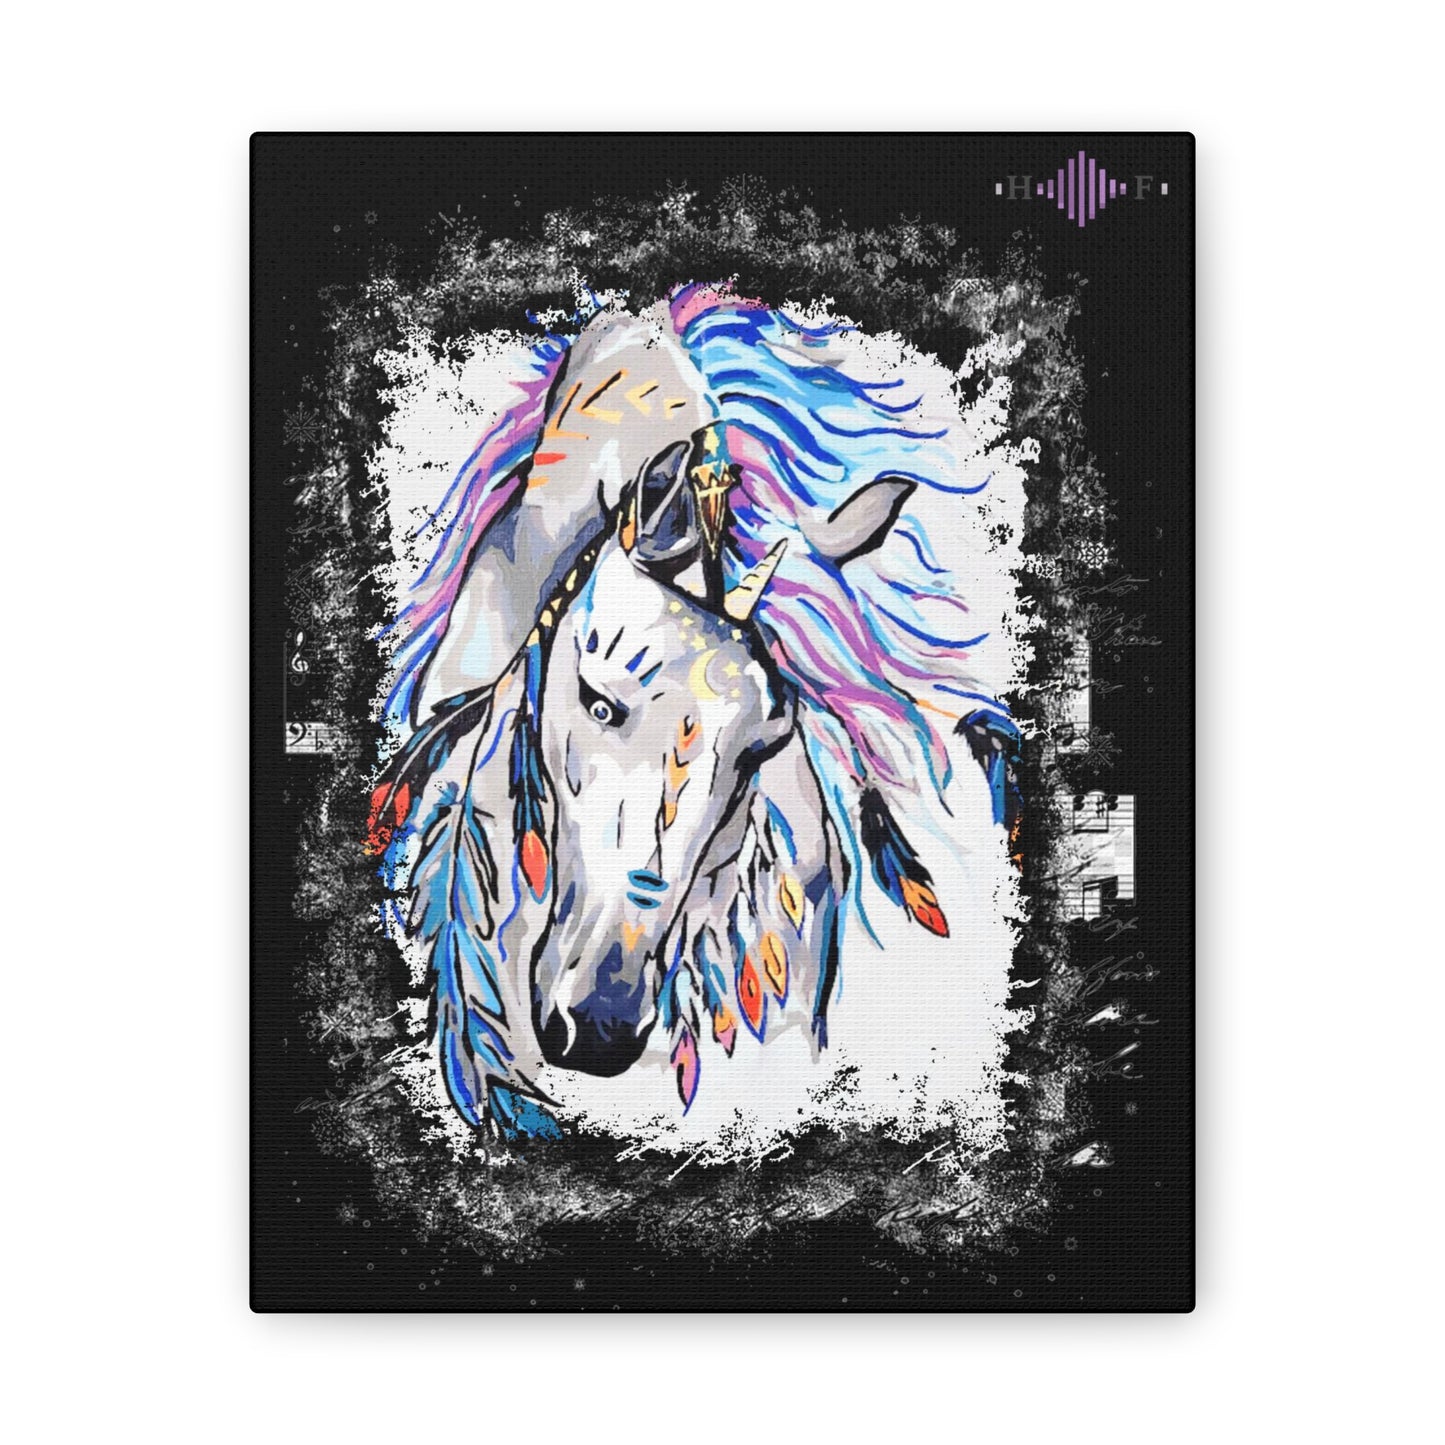 Gypsy Horse  ( Framed )- Canvas Stretched, 0.75"